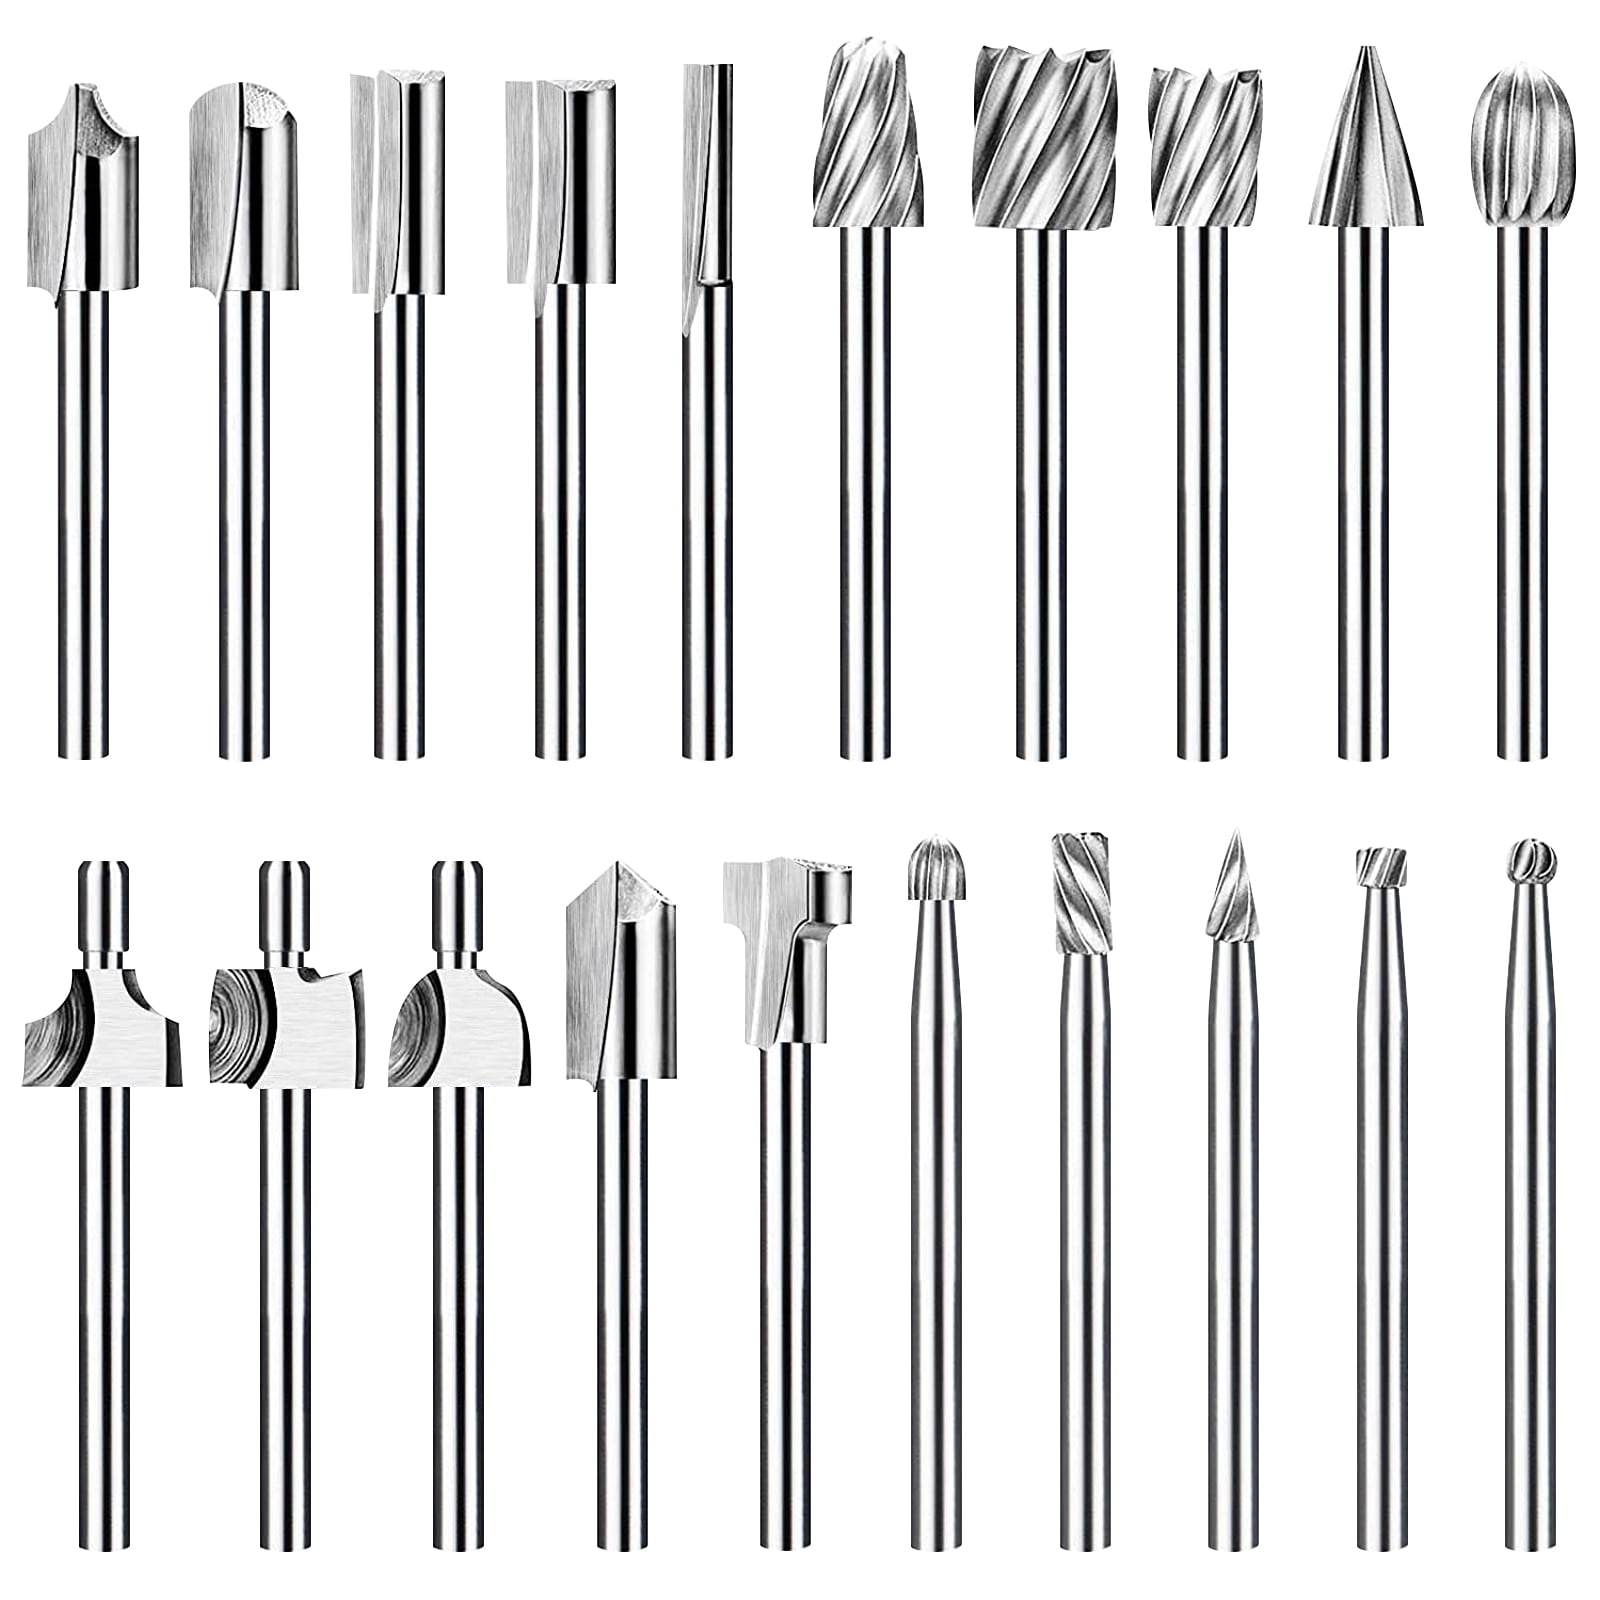 10pcs Carbide Burr Set Alloy Tungsten Steel High Hardness Wide Application  For Dremel Wood Carving Bits For Woodworking